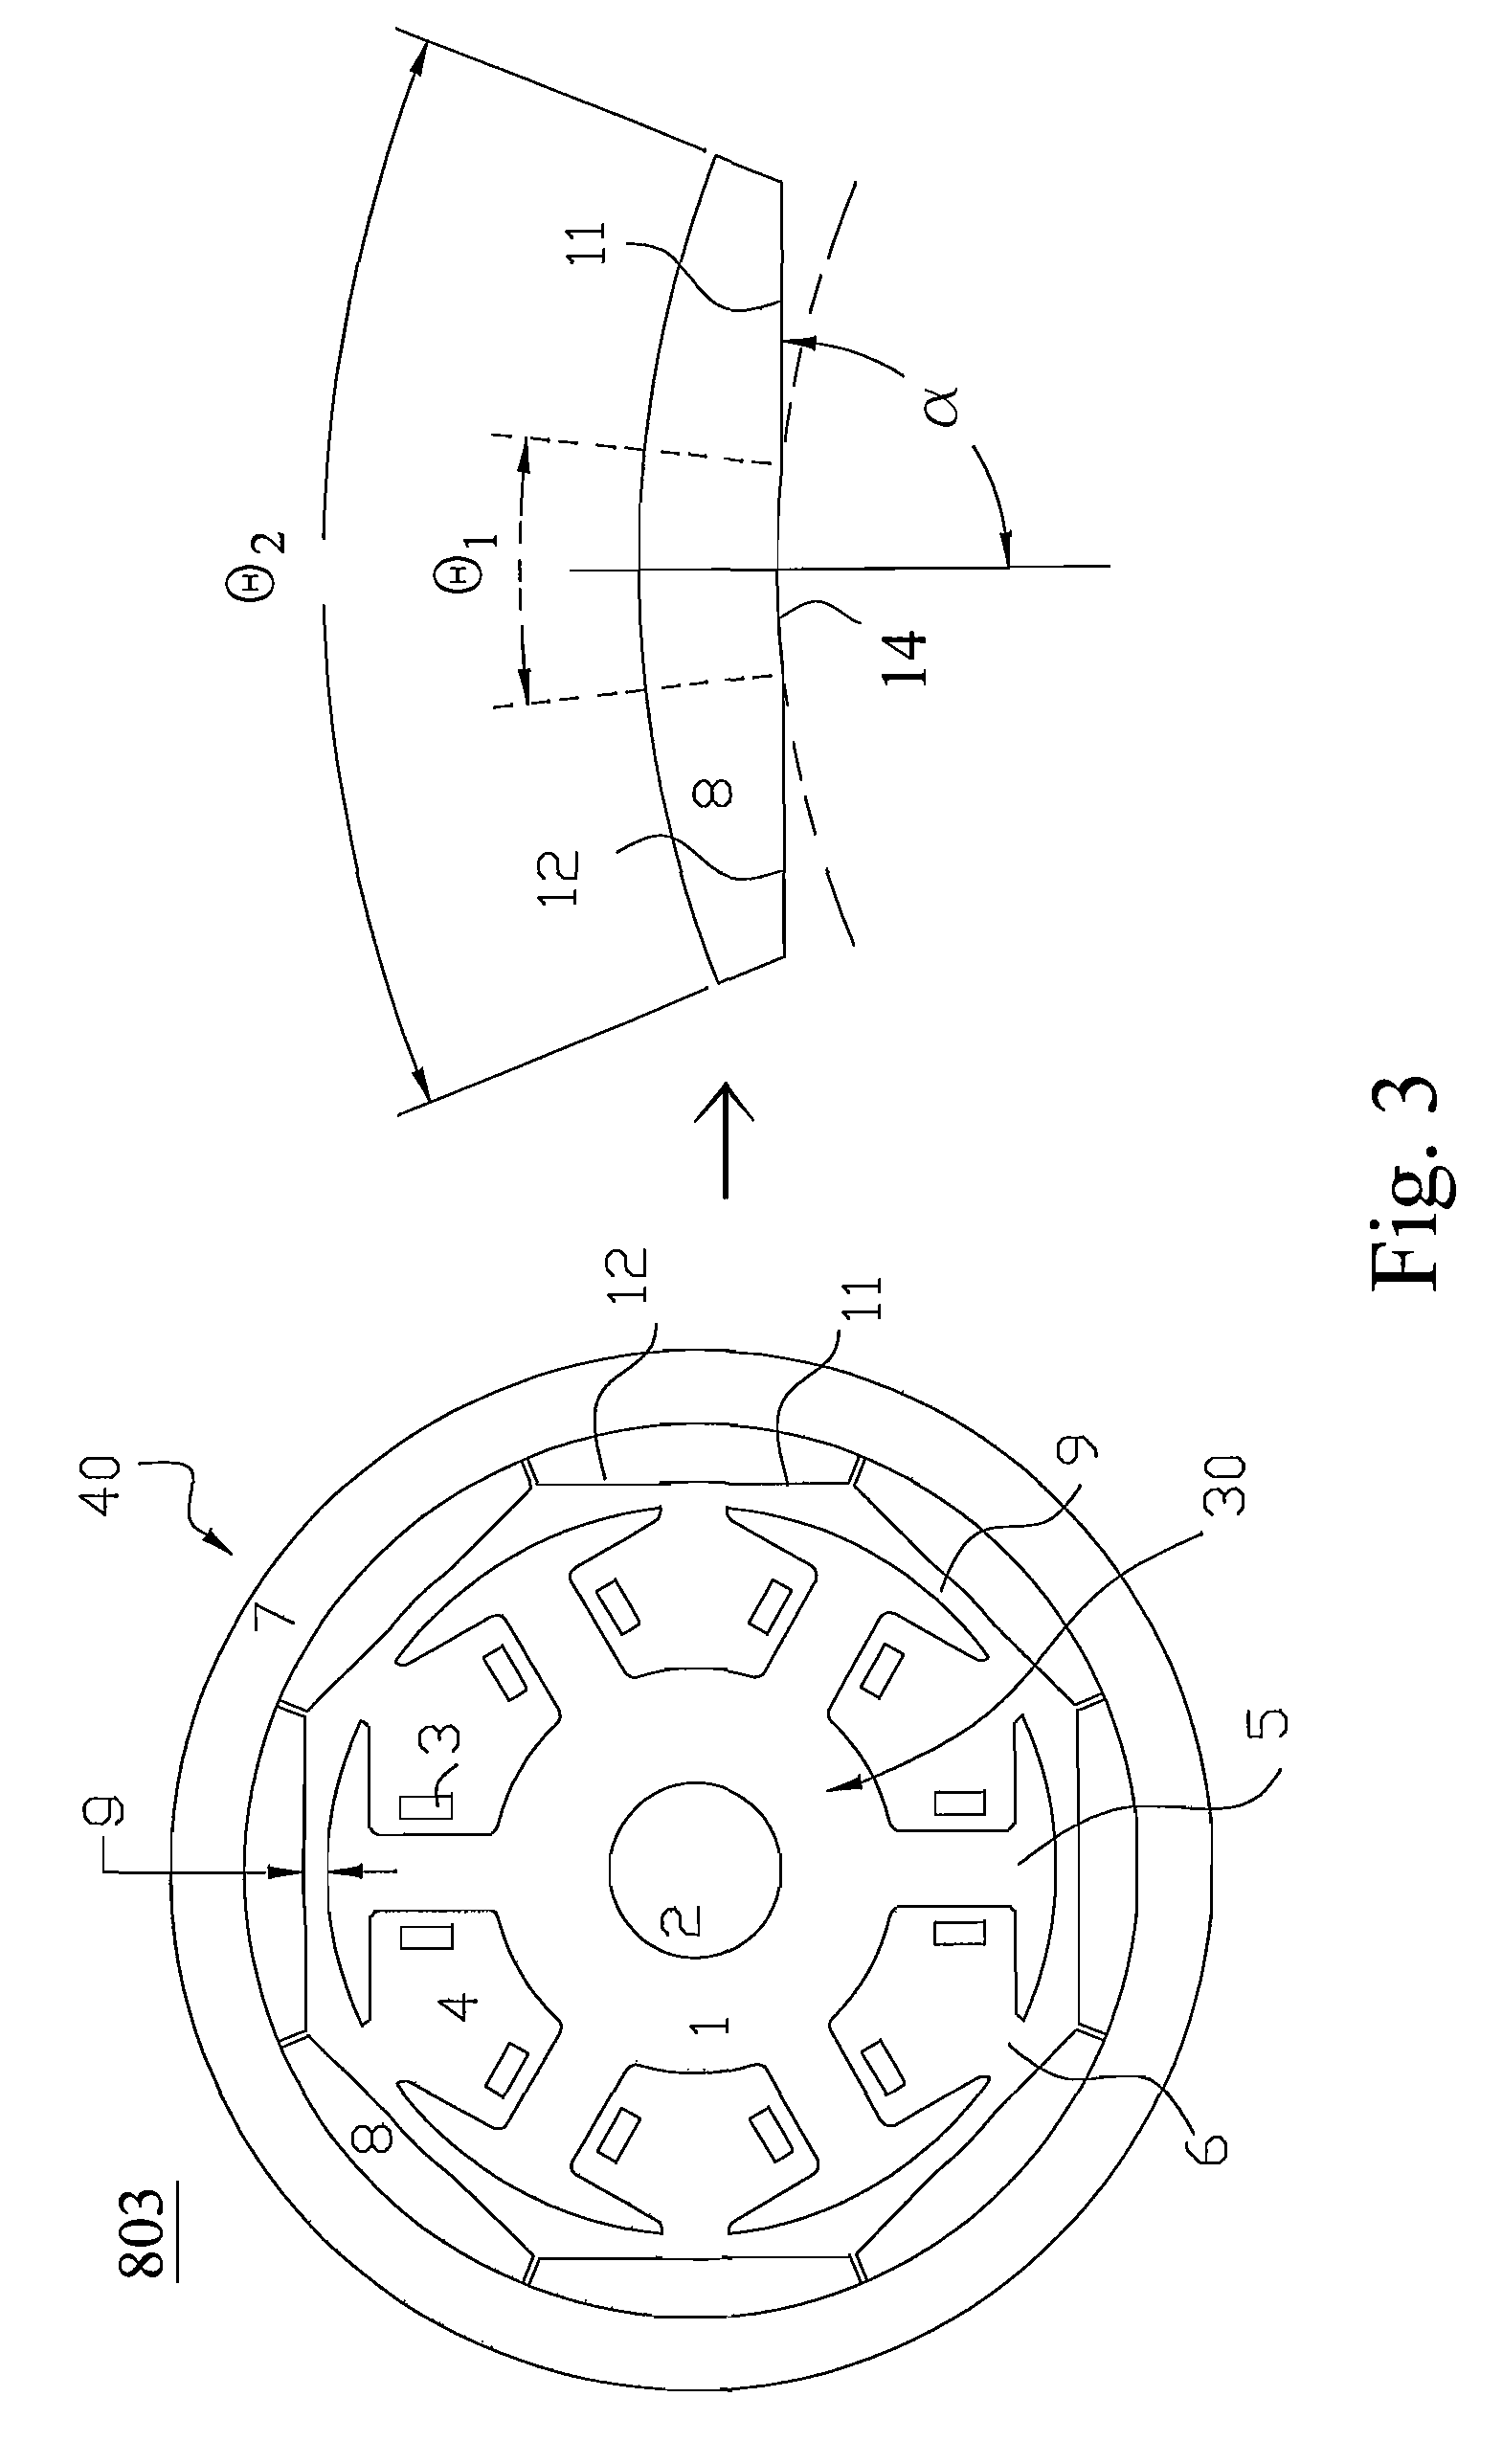 Rotary structure of permanent magnet electric machinery and method for determining the structure thereof